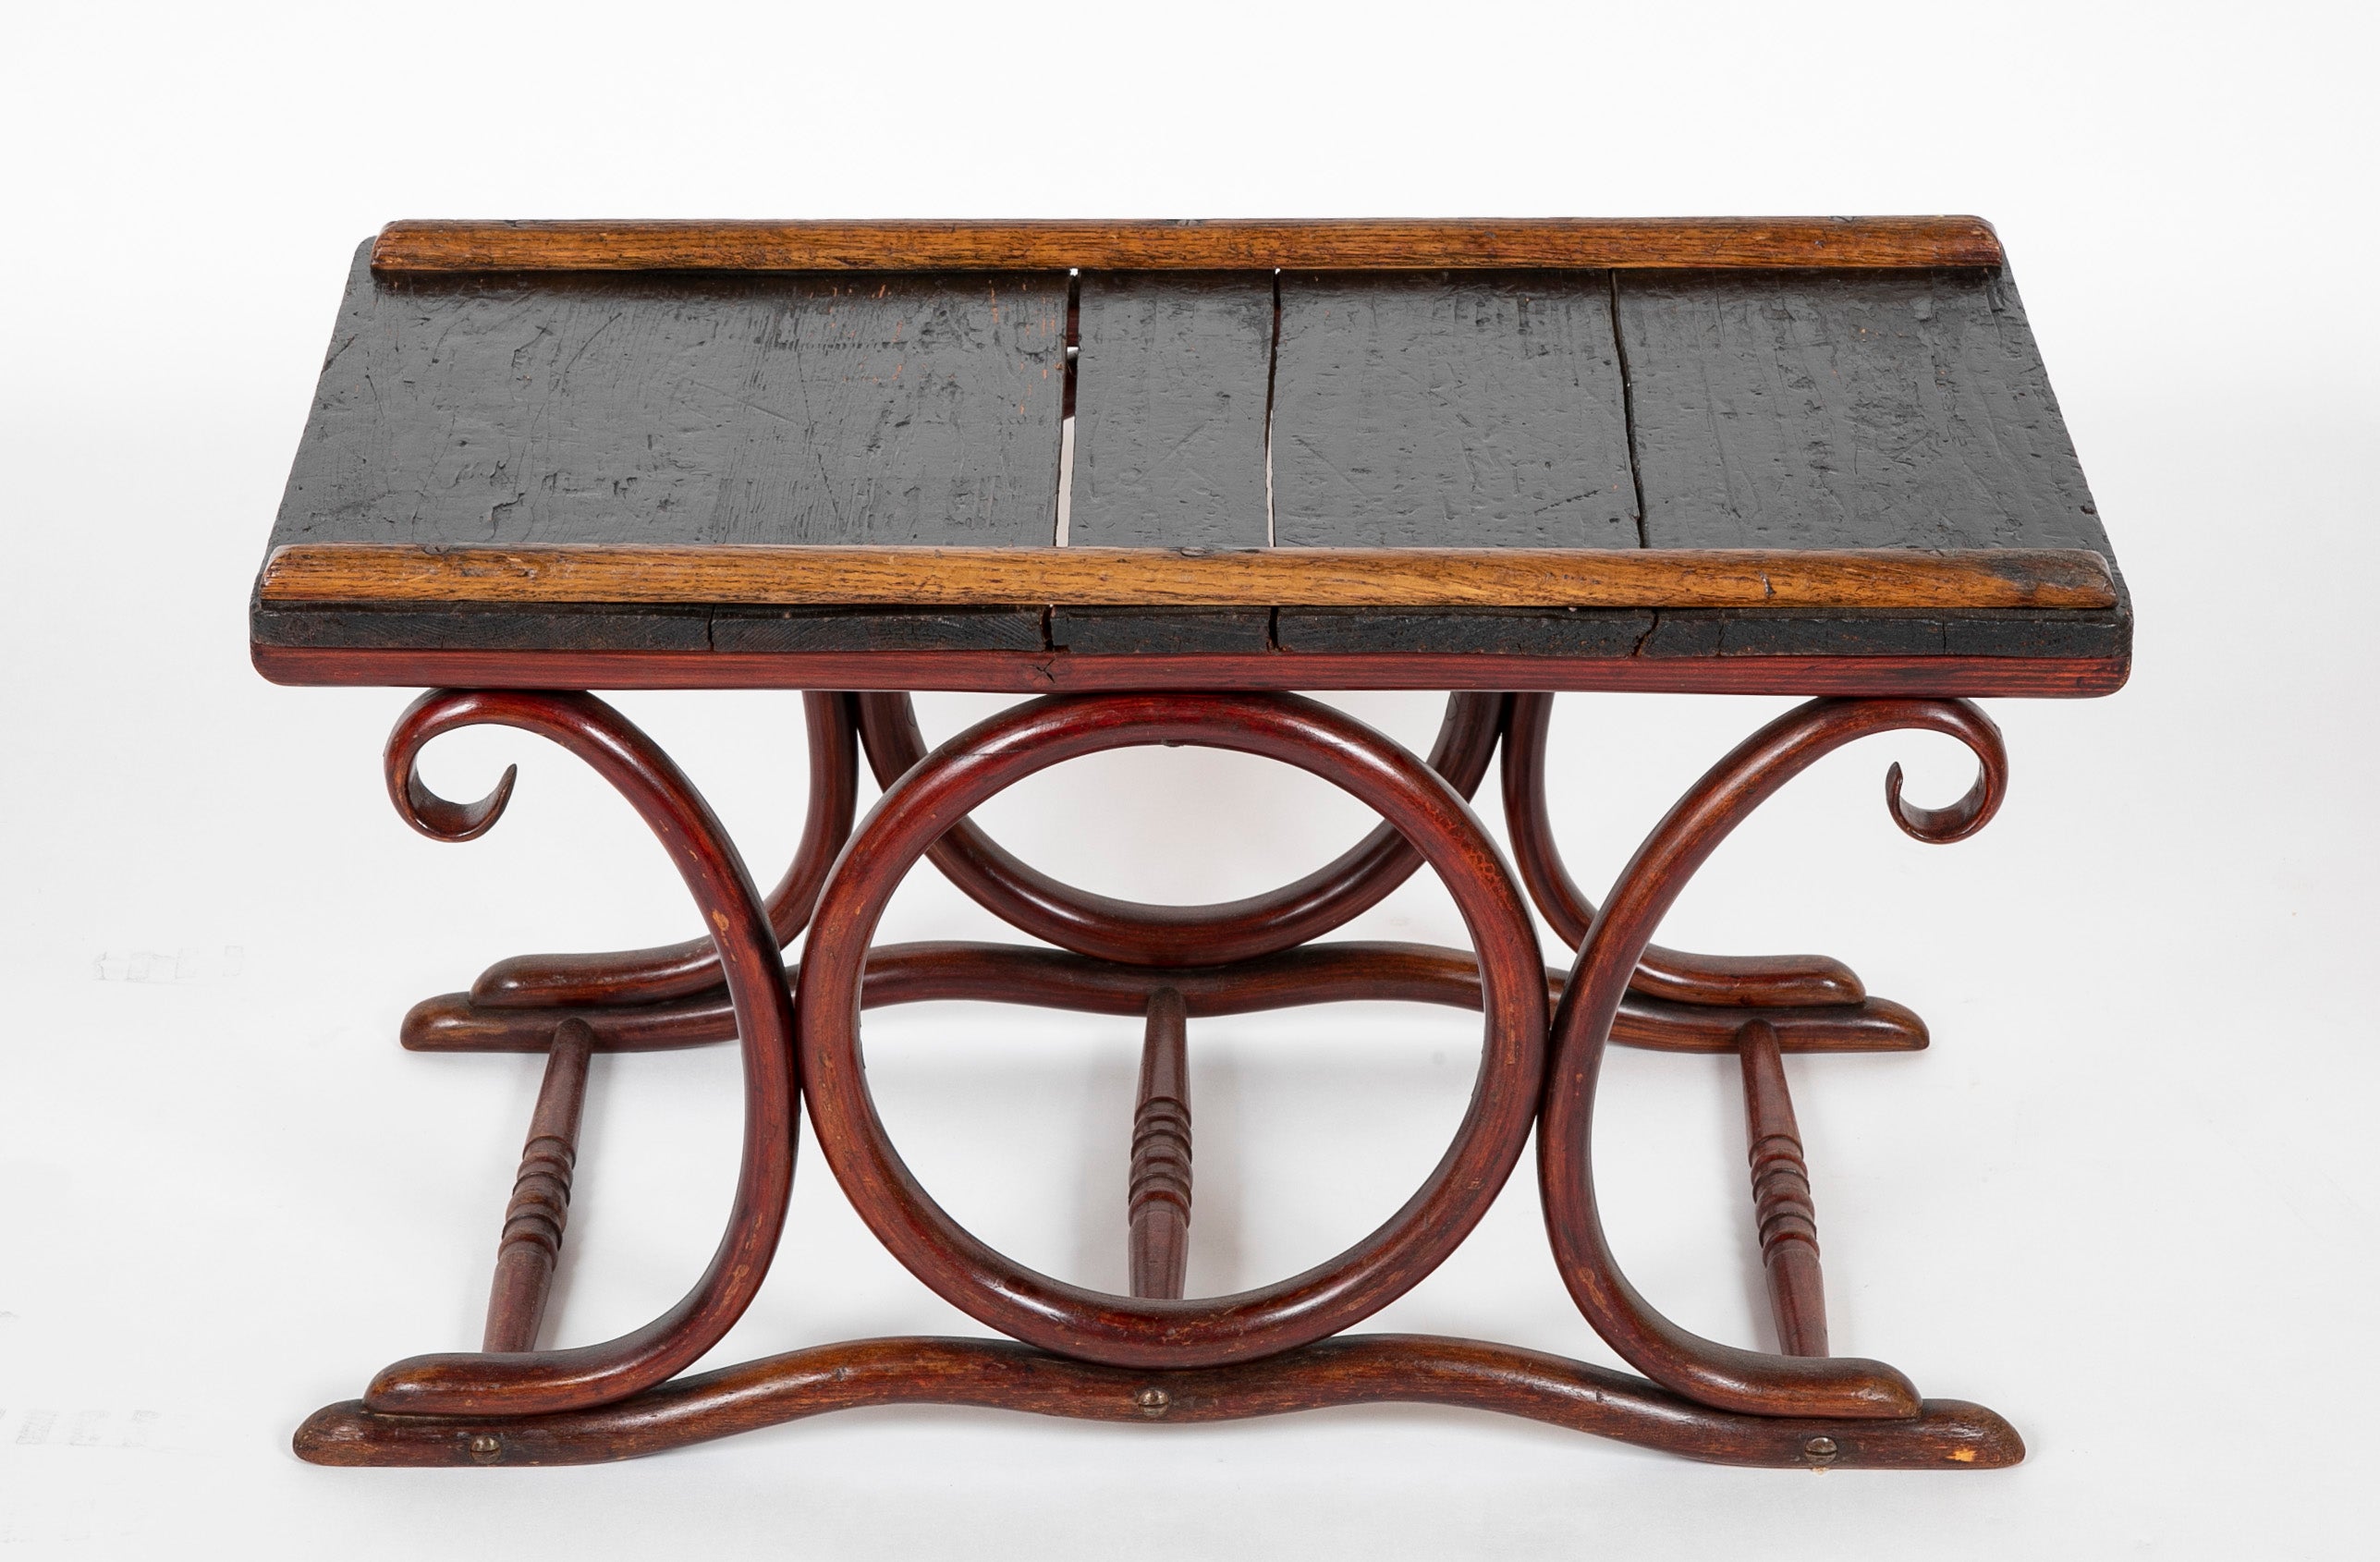 Pair of Late 19th Century Bentwood Tabourets